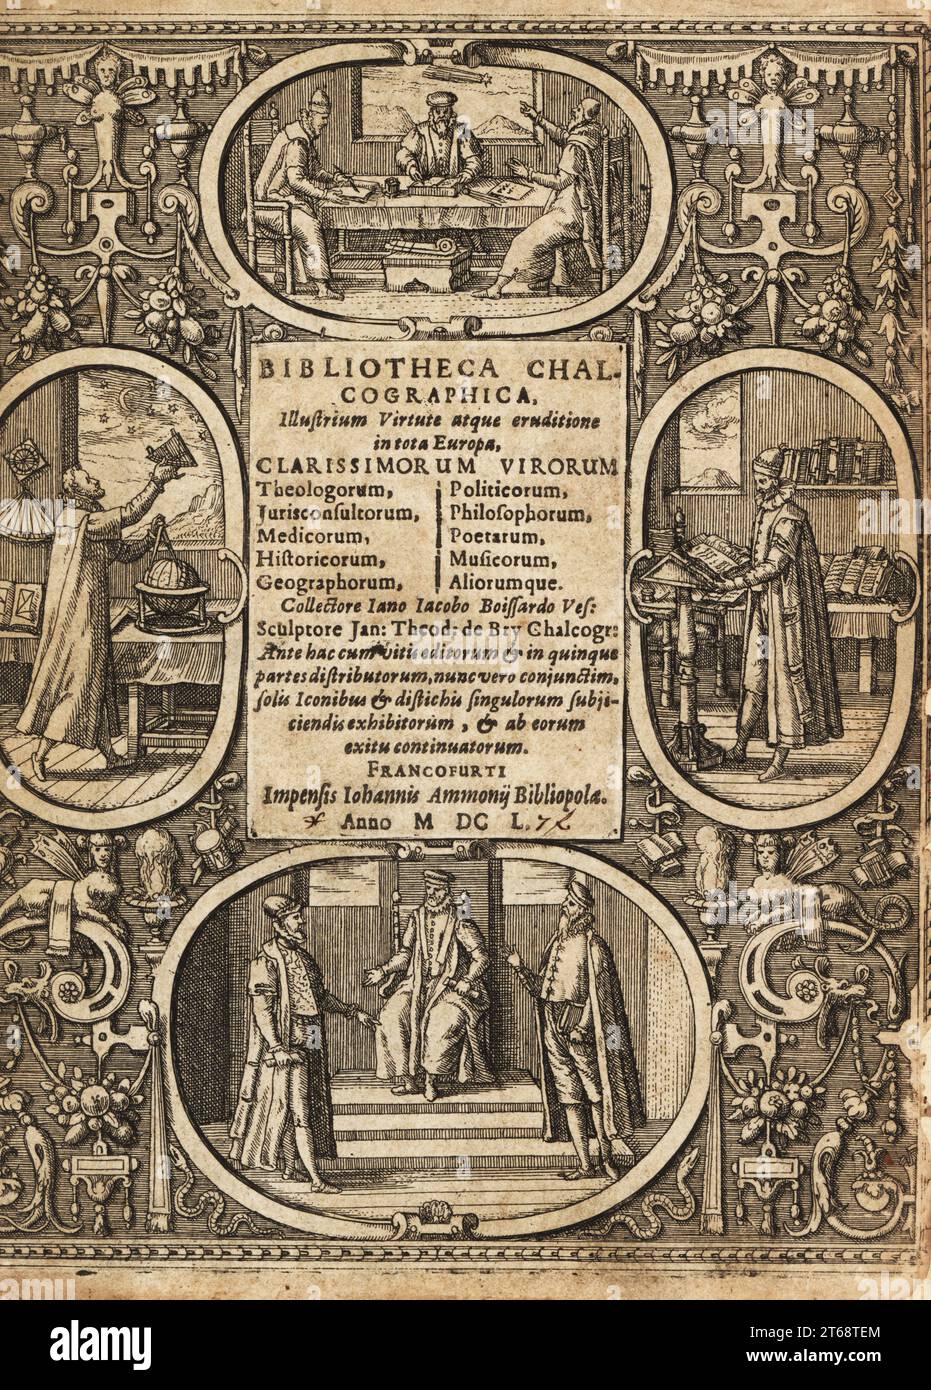 Frontispiece with vignettes of astronomer, geographer, scholars and courtiers within decorative border. Copperplate engraving by Johann Theodore de Bry from Jean-Jacques Boissards Bibliotheca Chalcographica, Johann Ammonius, Frankfurt, 1650. Stock Photo